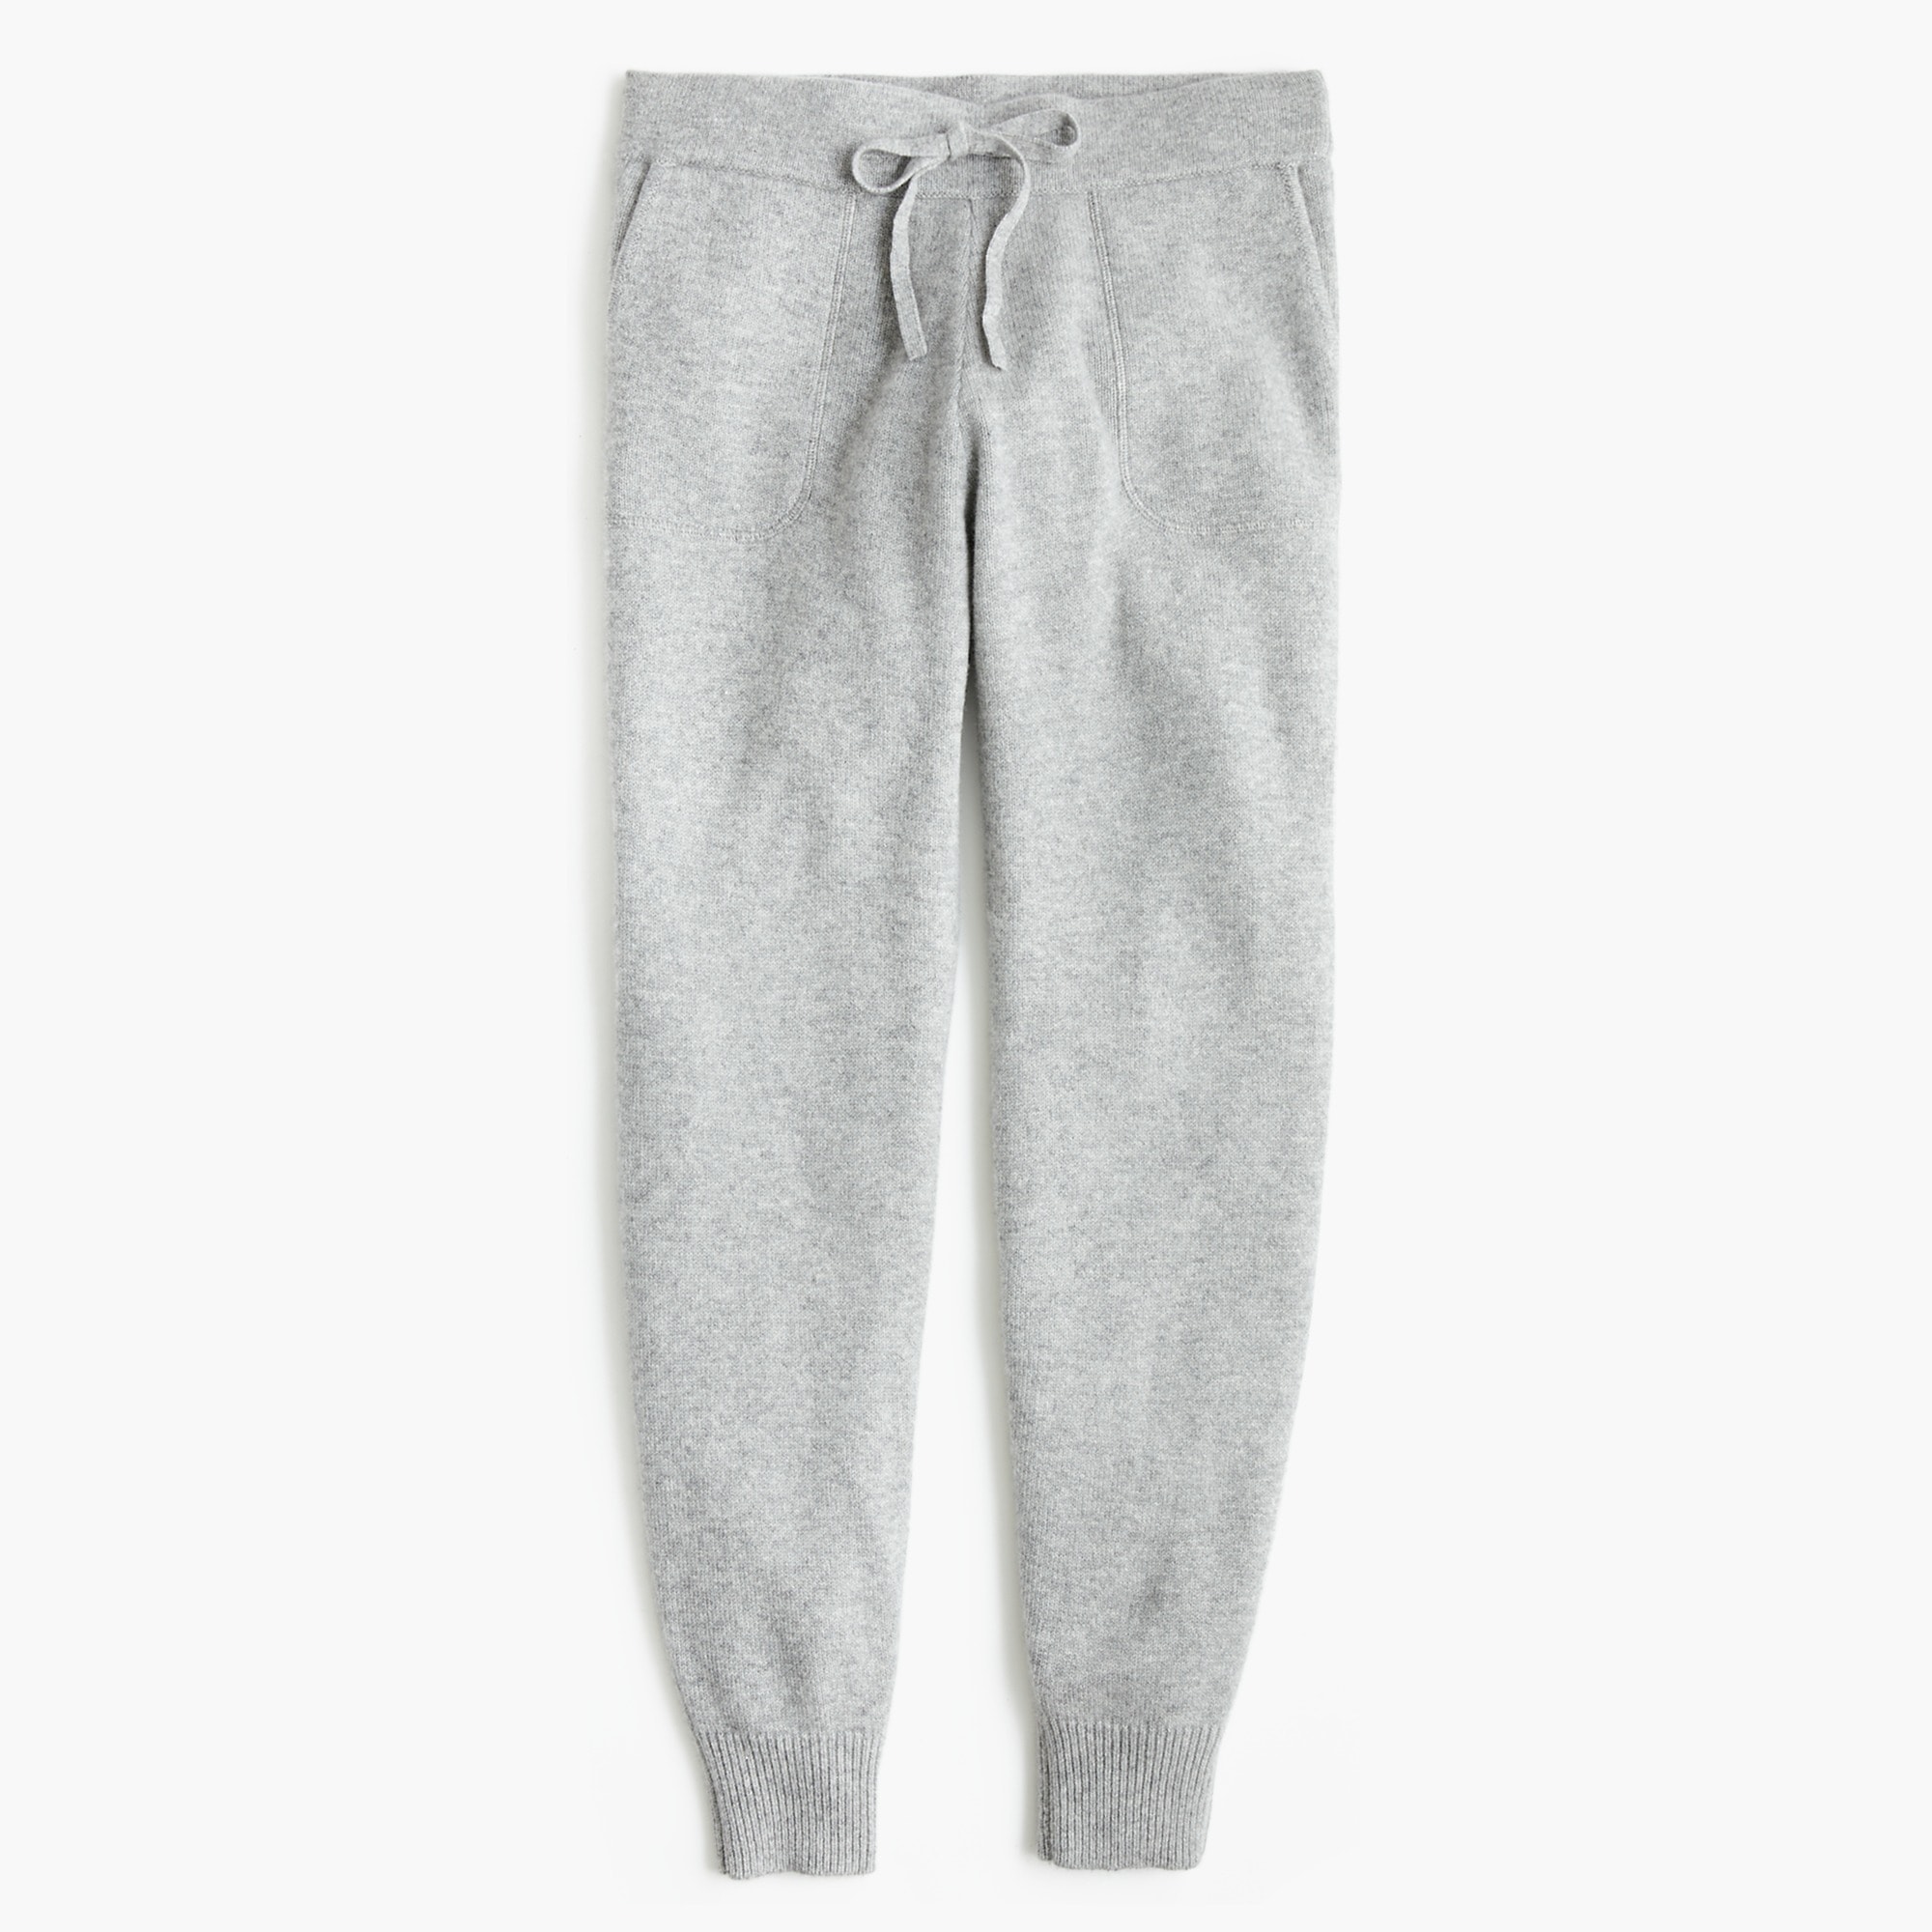 J.Crew: Joggers In Everyday Cashmere For Women